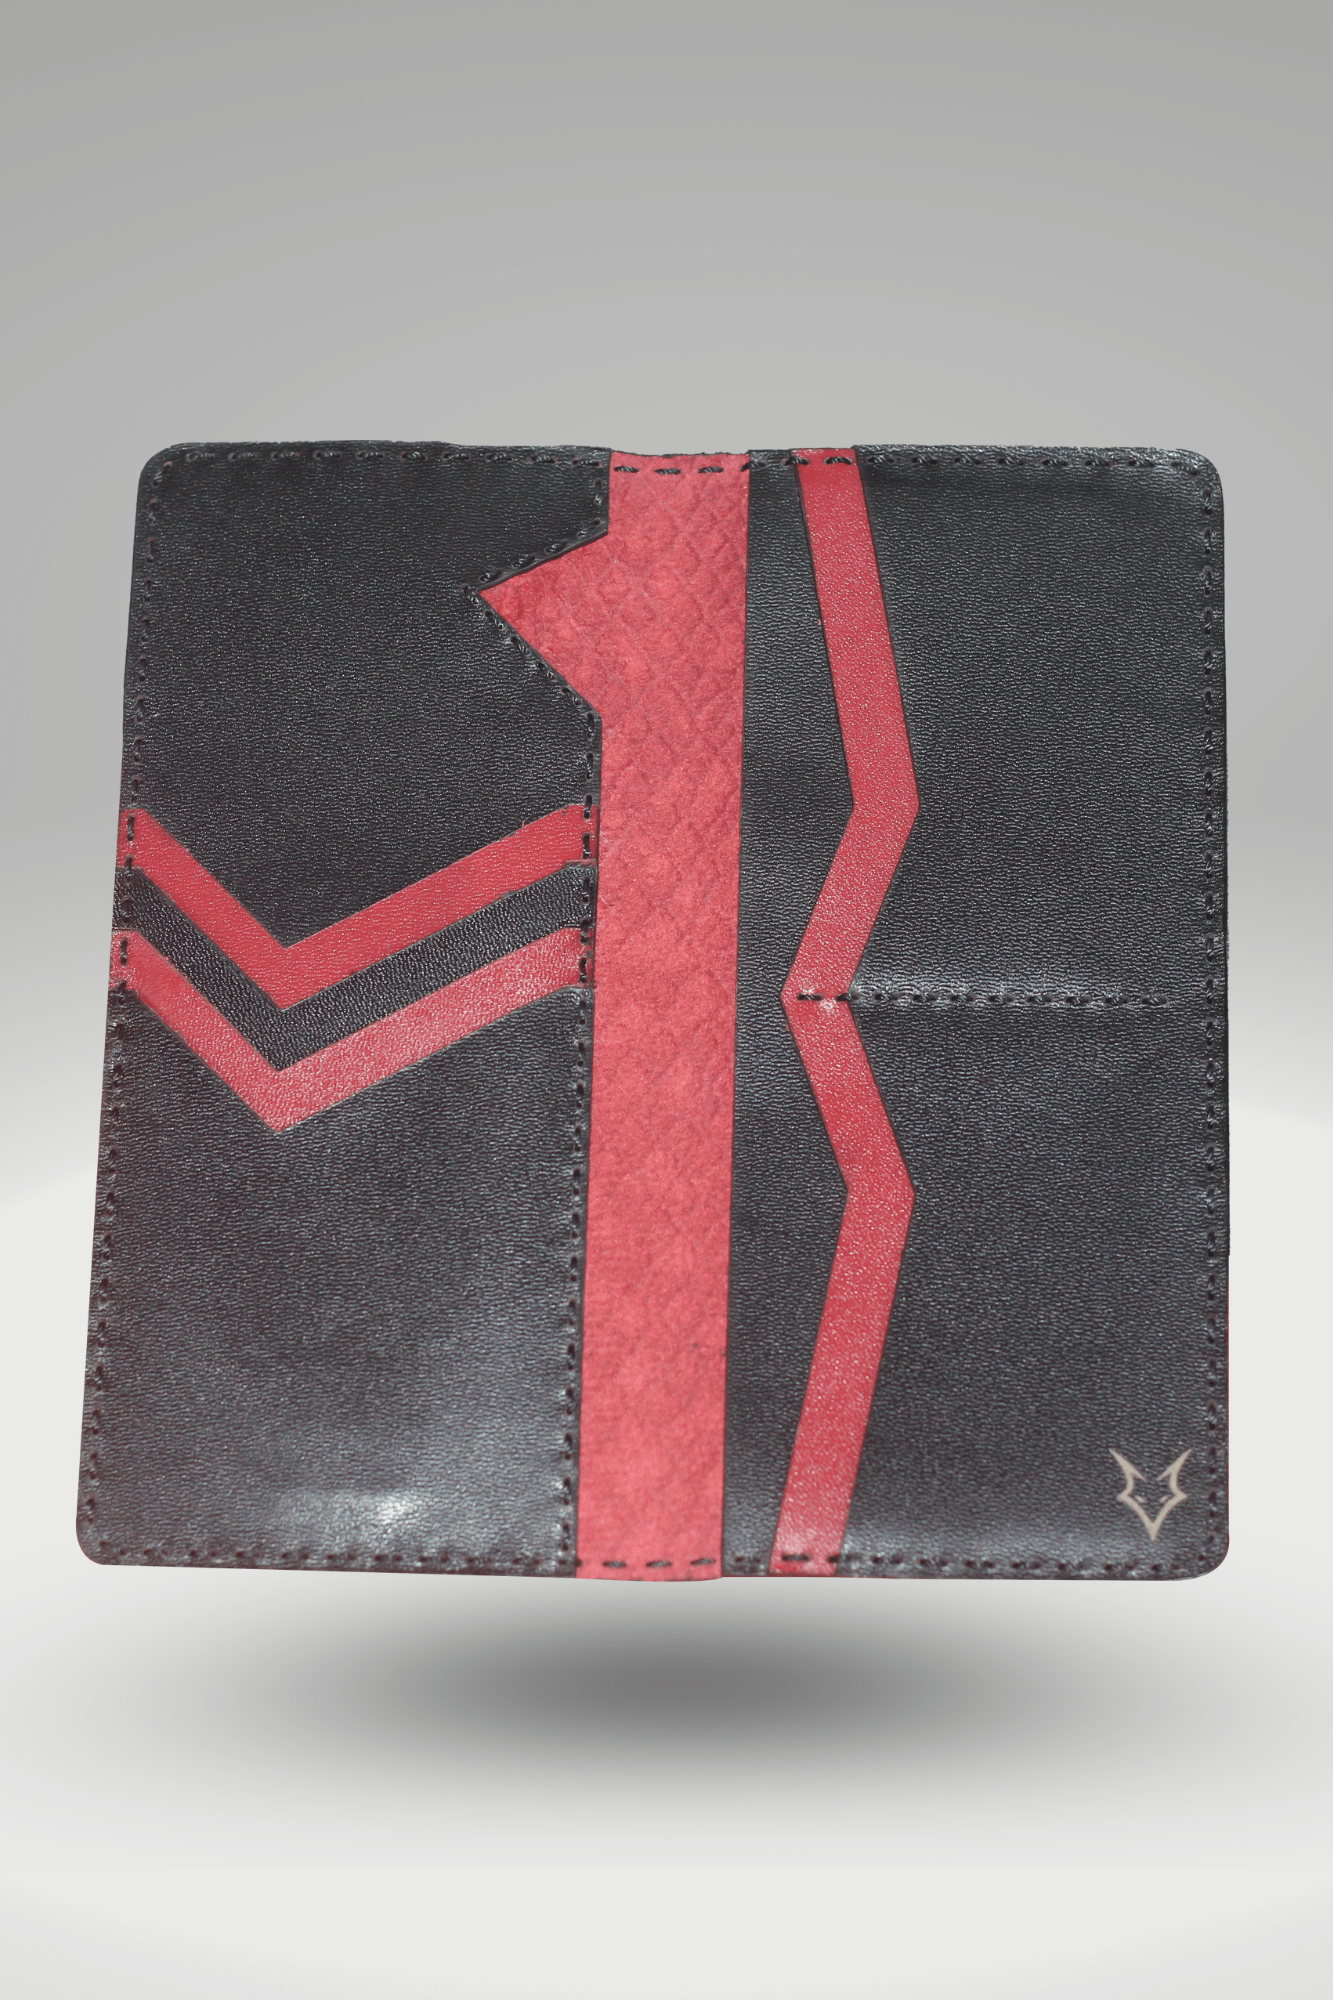 Unisex Genuine Leather Wallet With Perforated Red & Black Camouflage Textured Finish | Exotic Bi-fold Leather Long Wallet